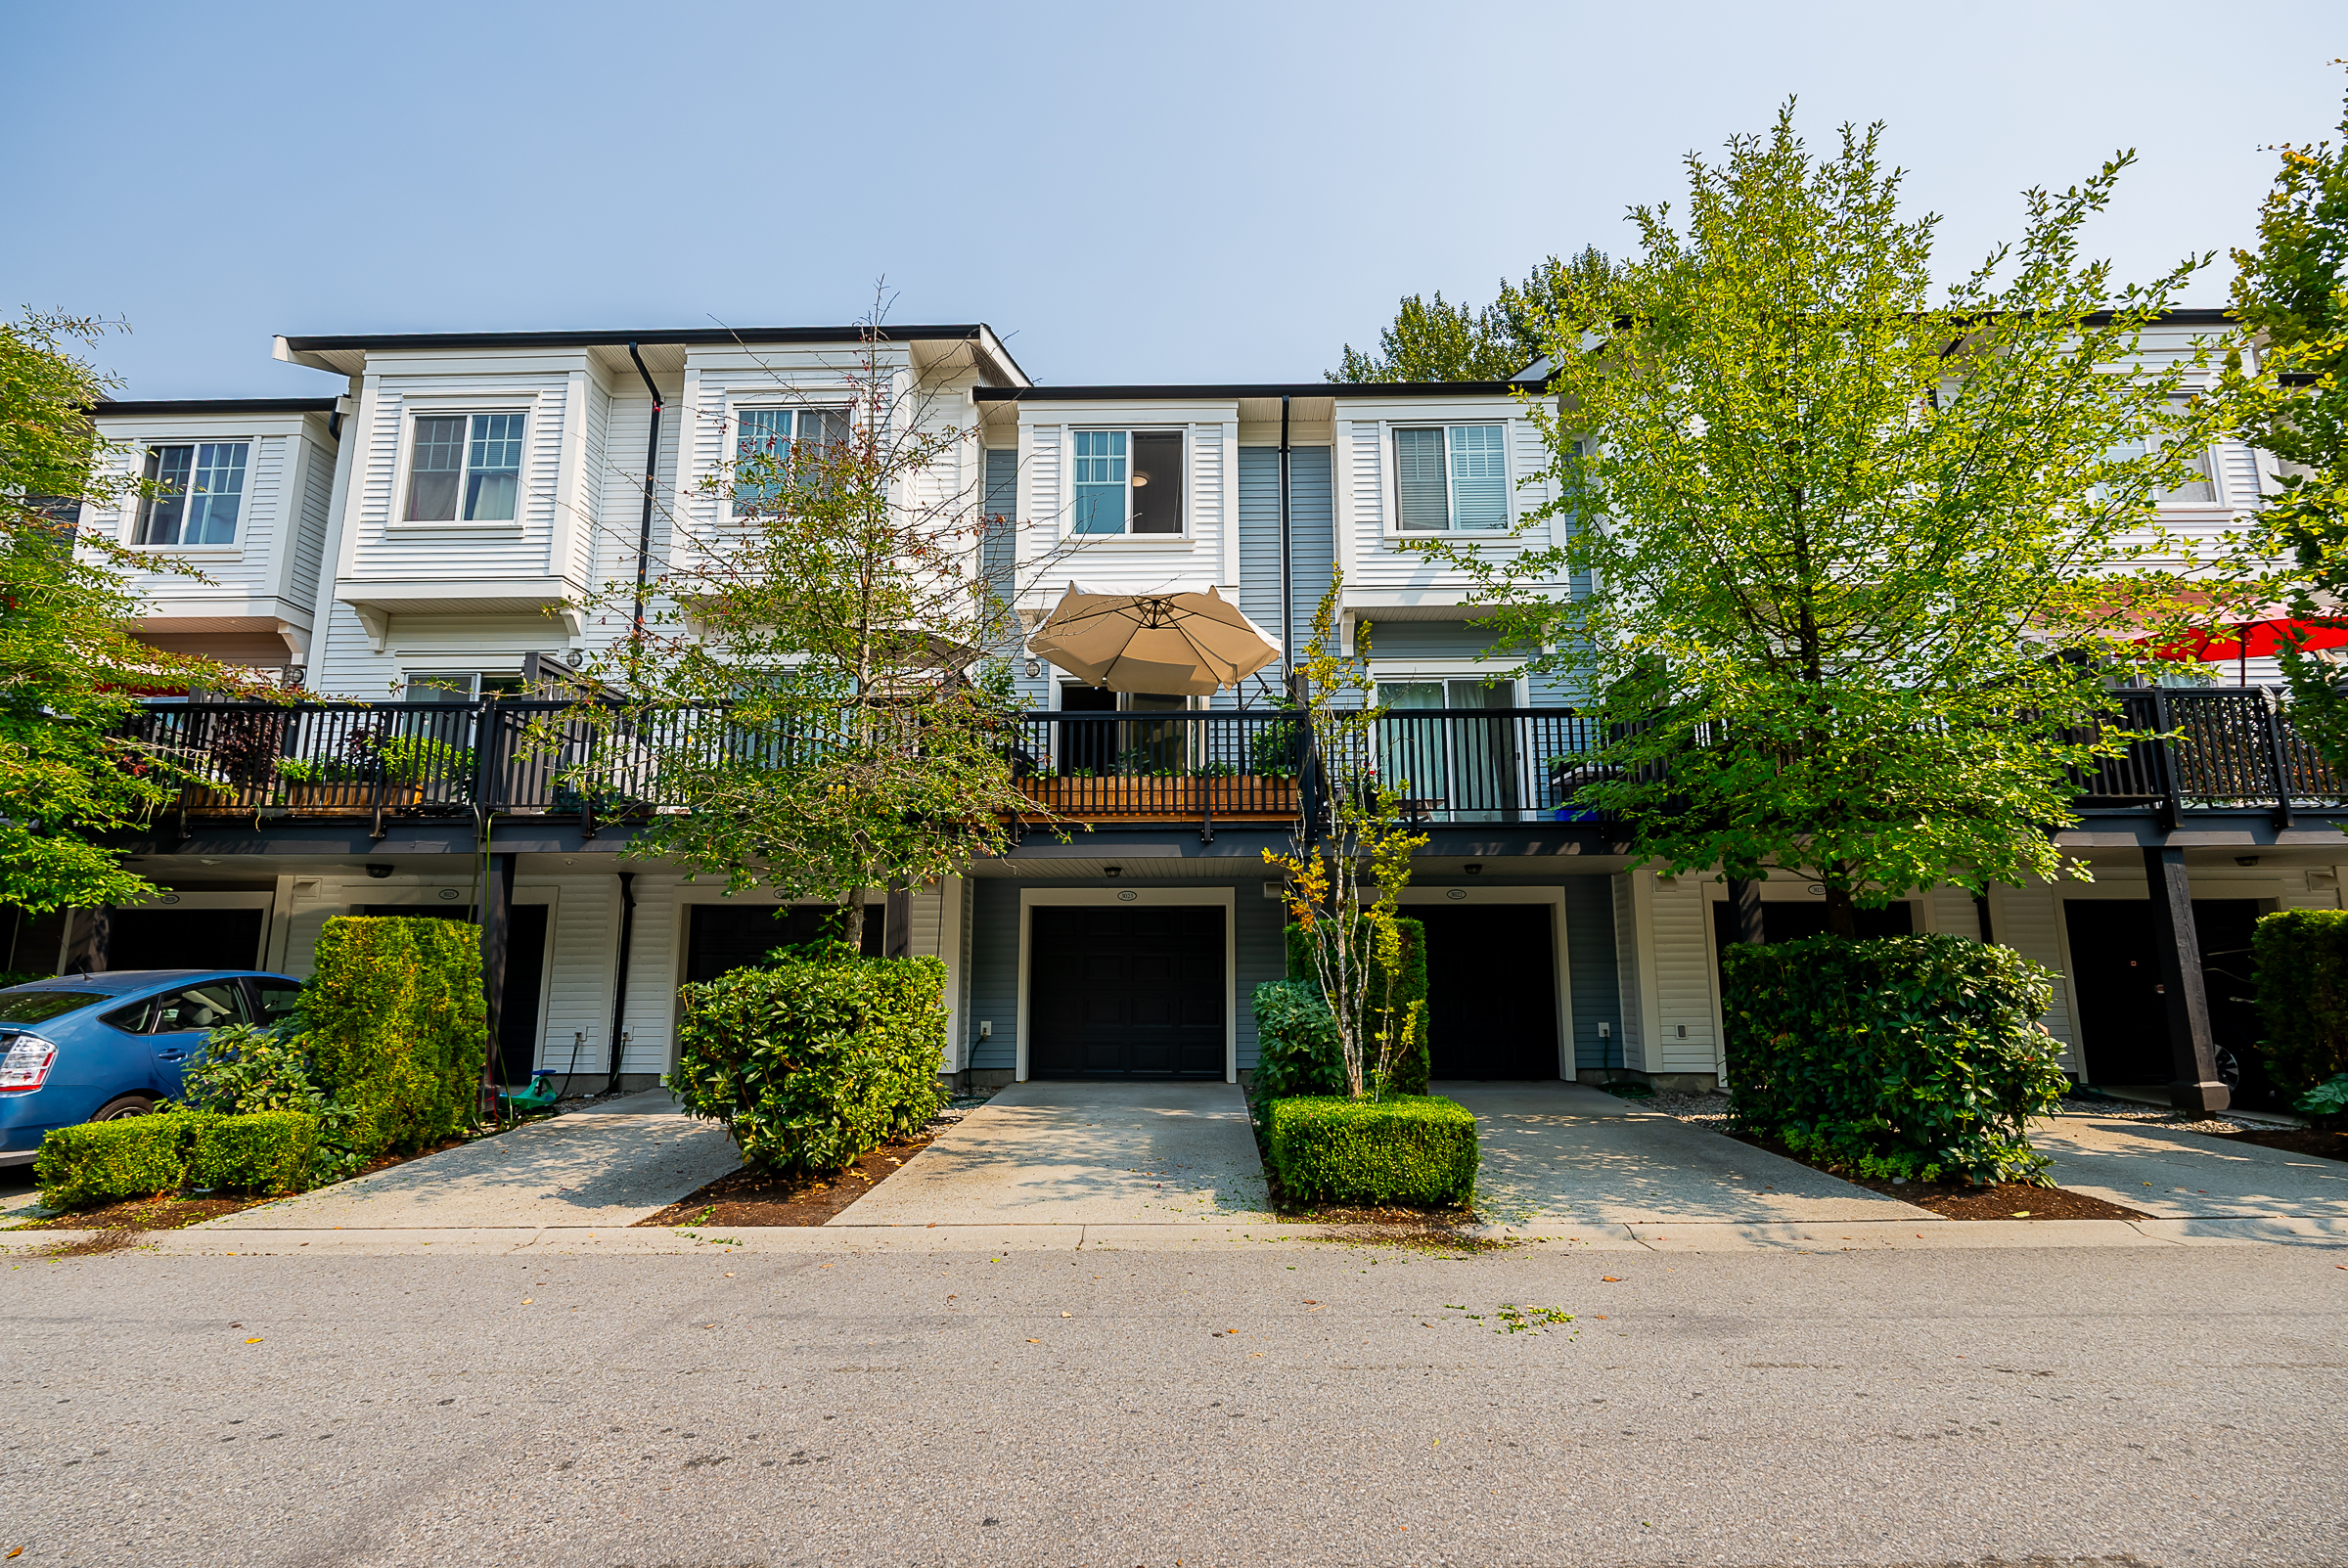 Unit 302 2655 Bedford Street Port Coquitlam Townhome Listings For Sale Krista Lapp Realtor